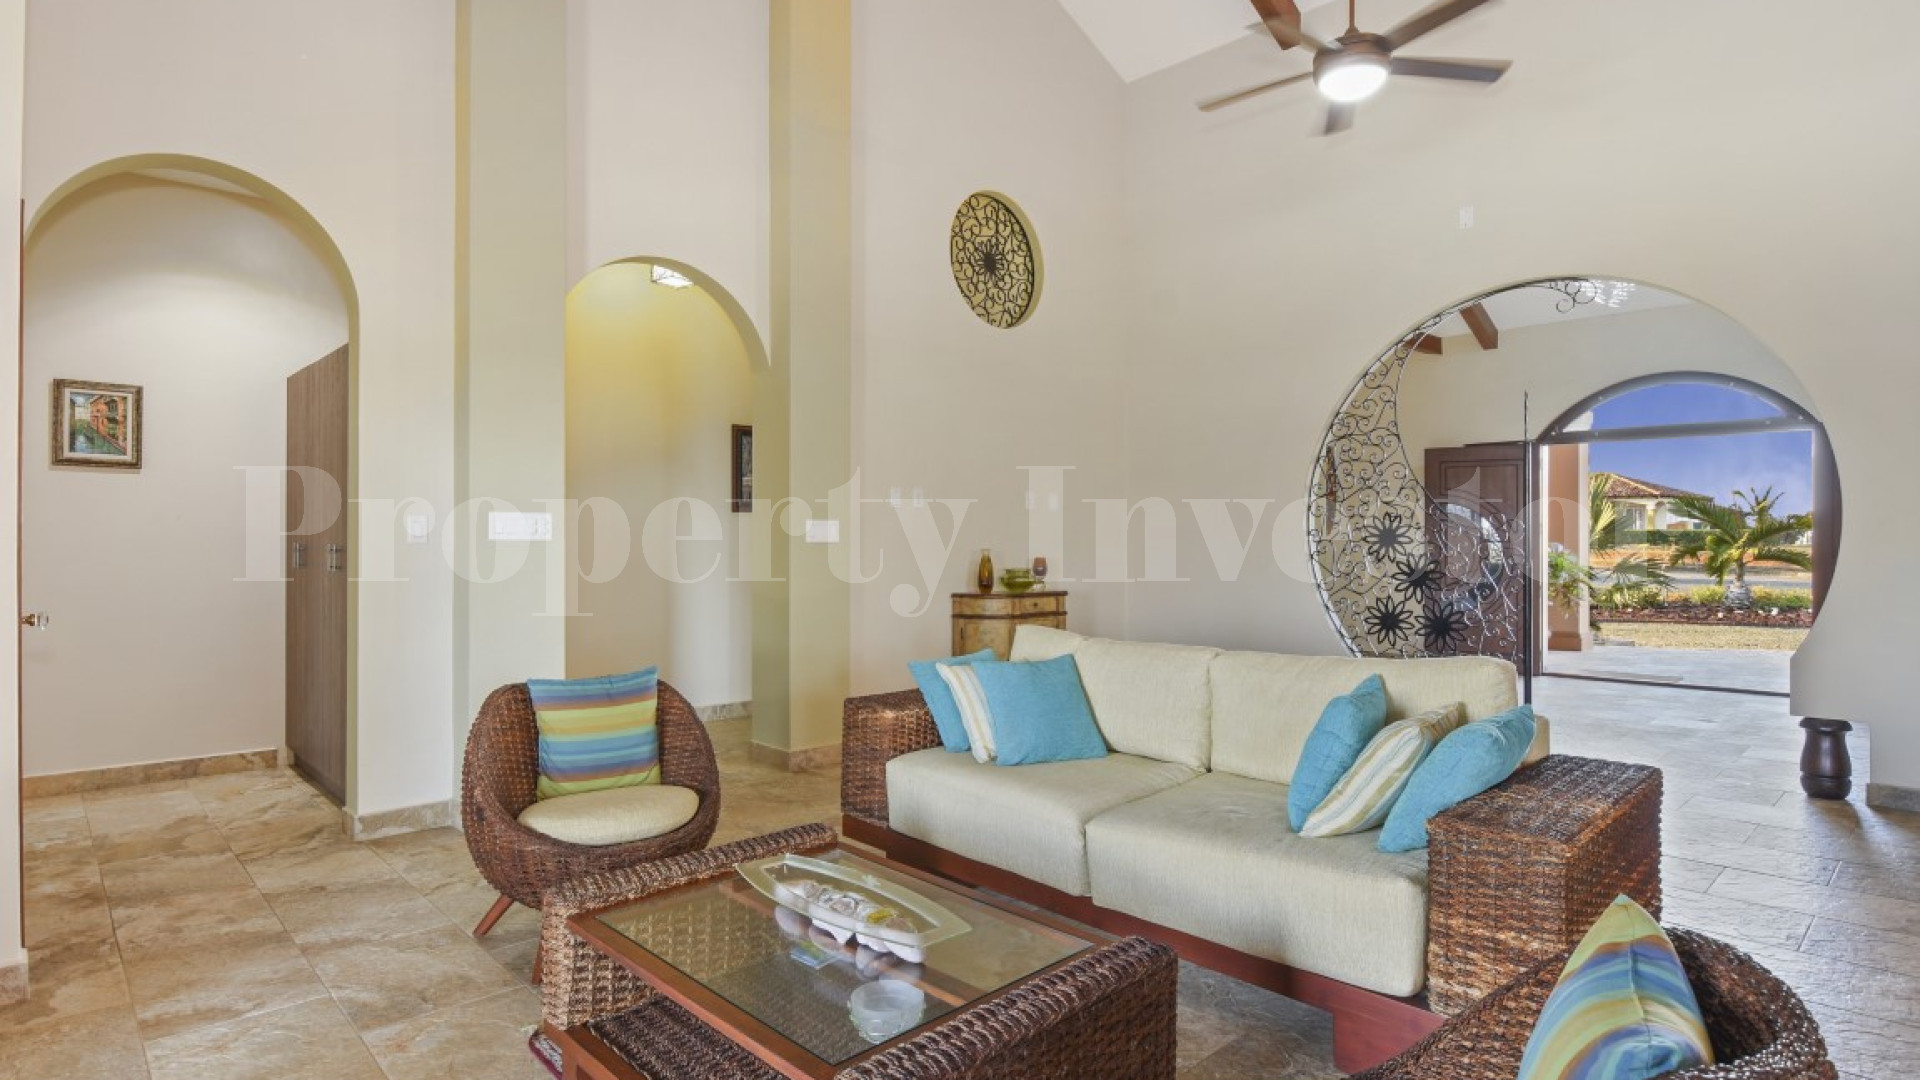 Dazzling 3 Bedroom Oceanview Gated Community Home for Sale in Pedasi, Panama